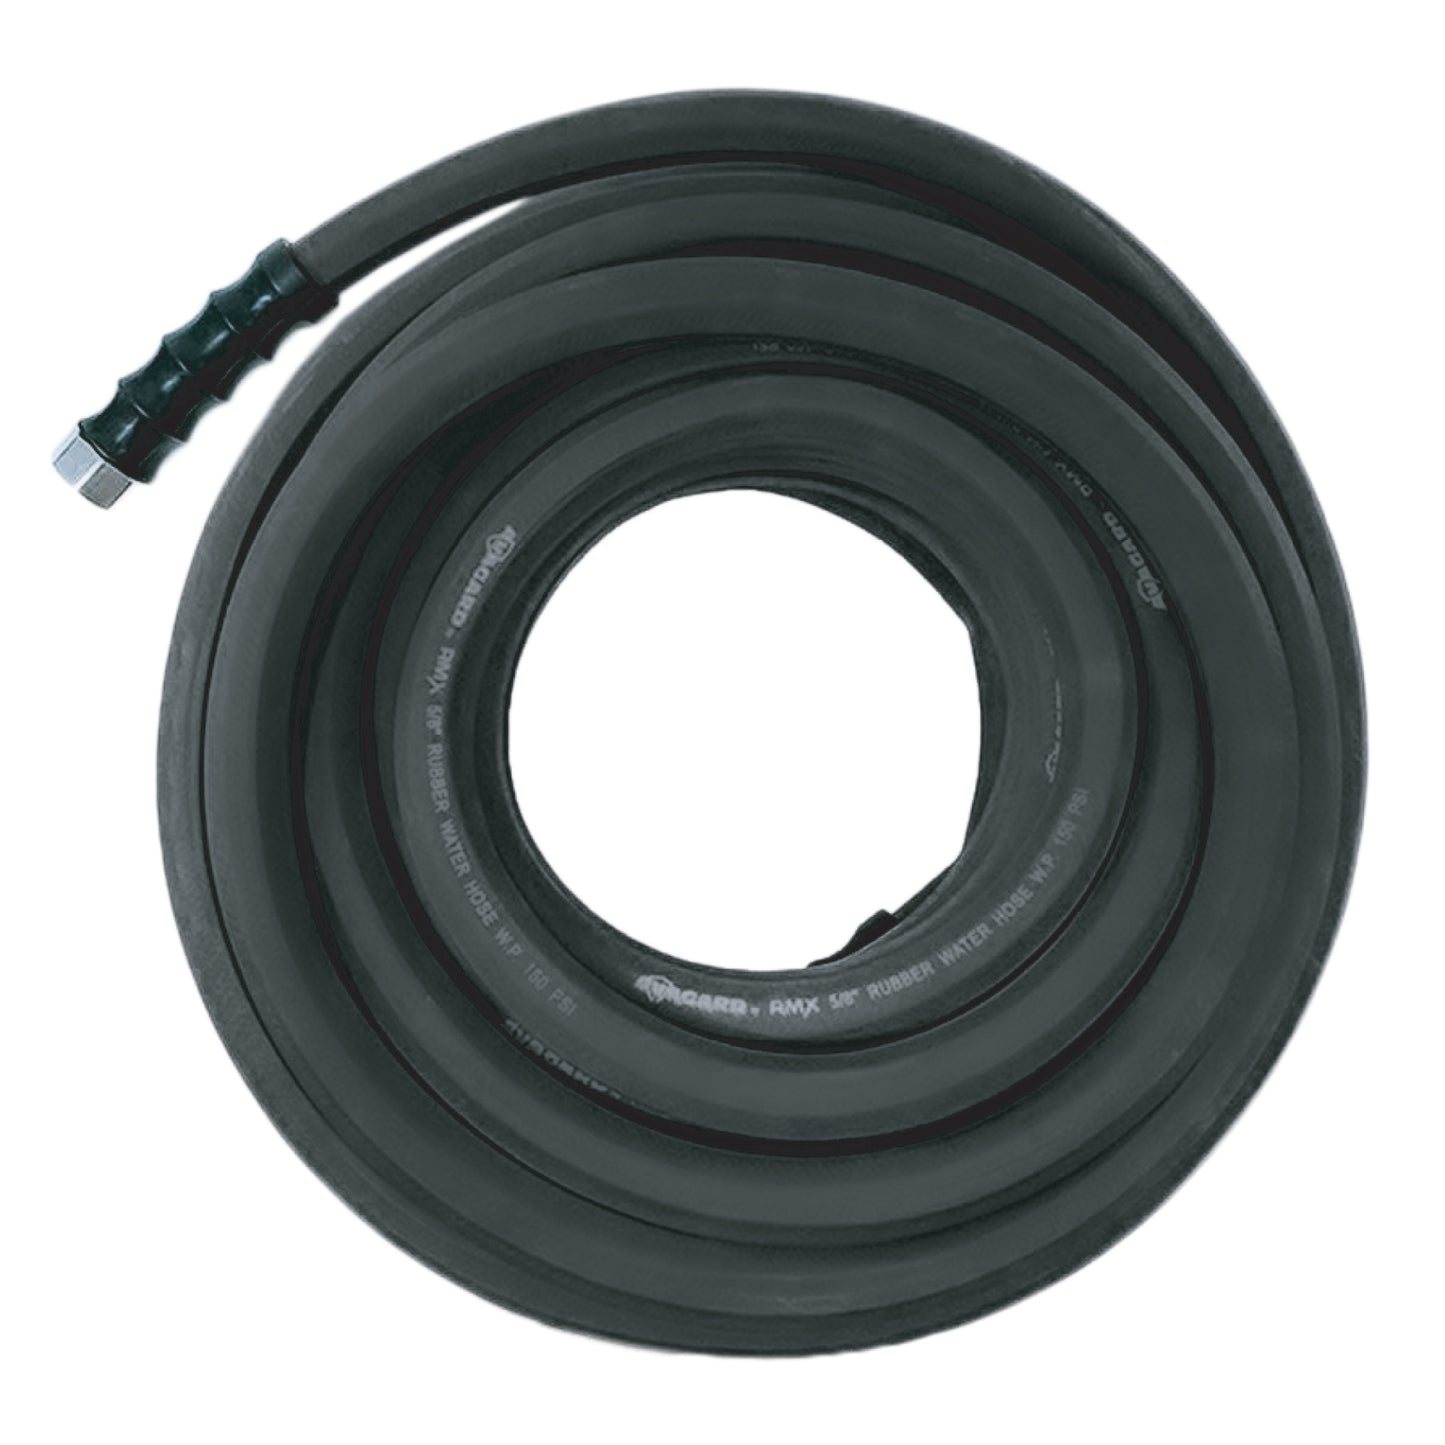 Avagard 16mm x 15m Rubber Water hose, Contractor Grade, UV Resistant, Anti-Kink